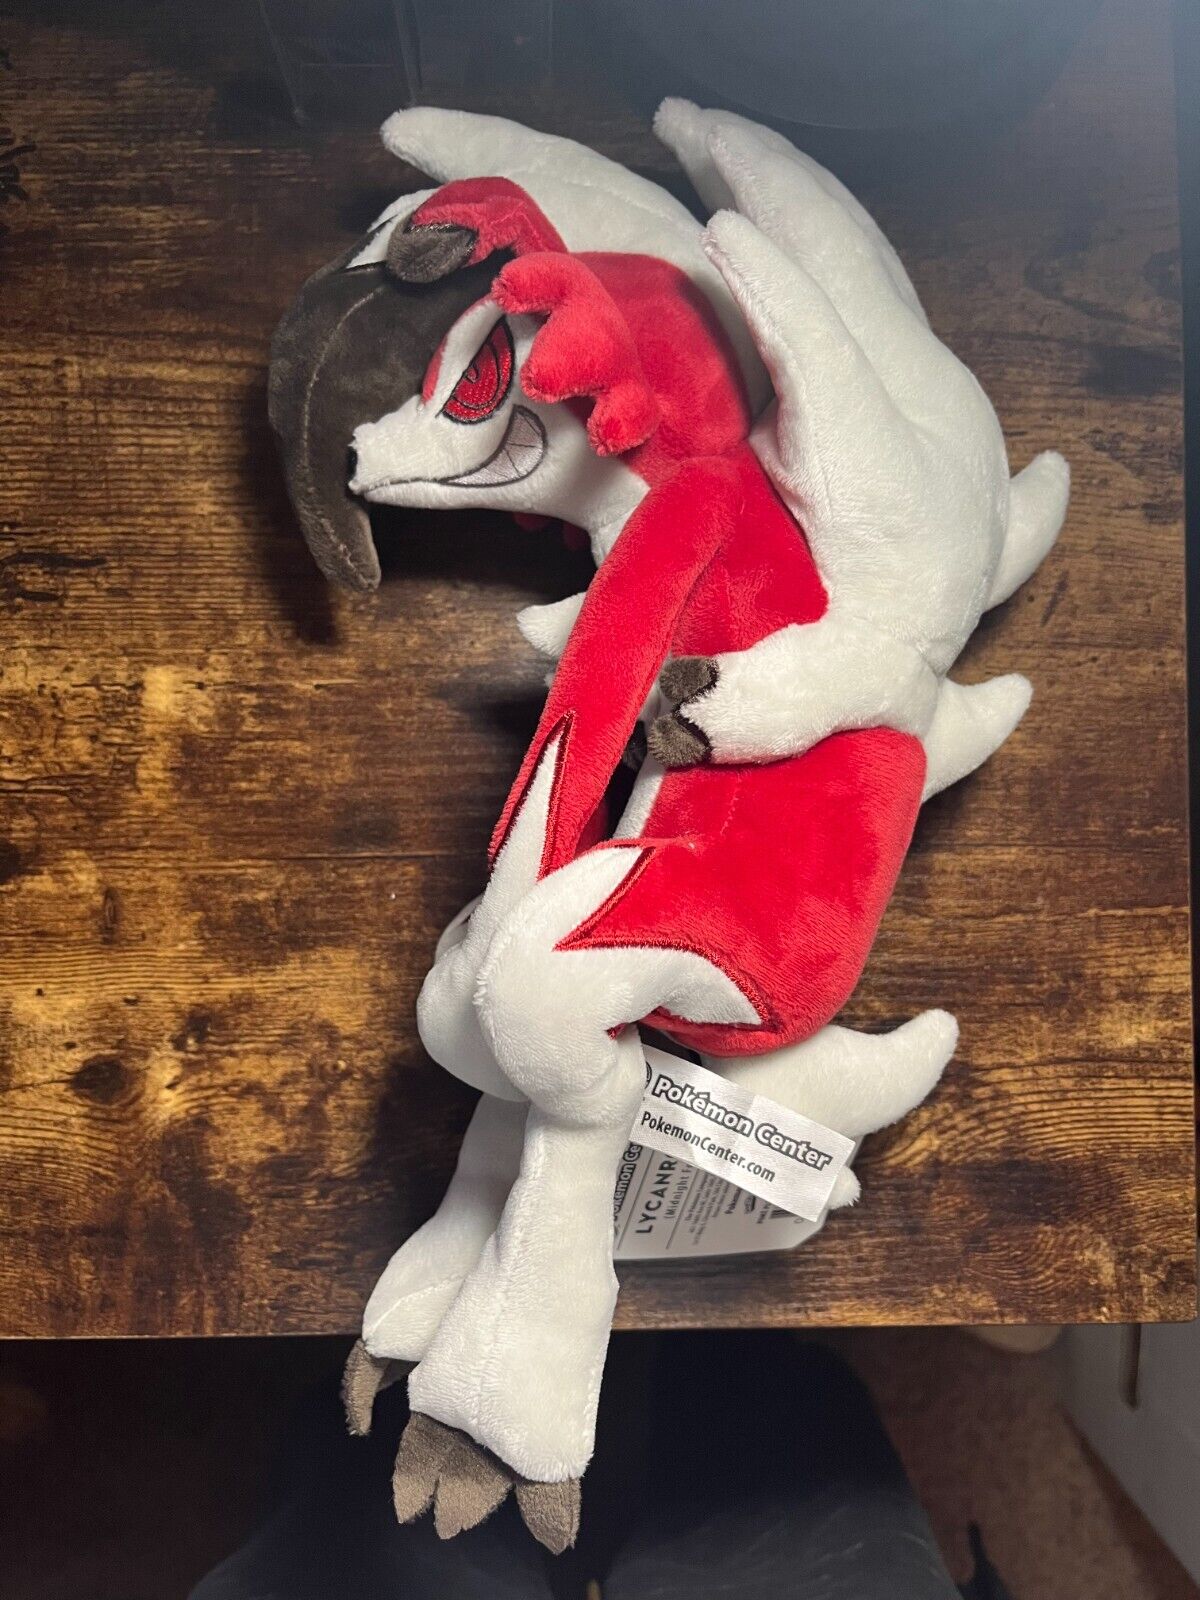 Midnight Form Lycanroc Official Licensed Pokemon Center Plush 2017 - NWT